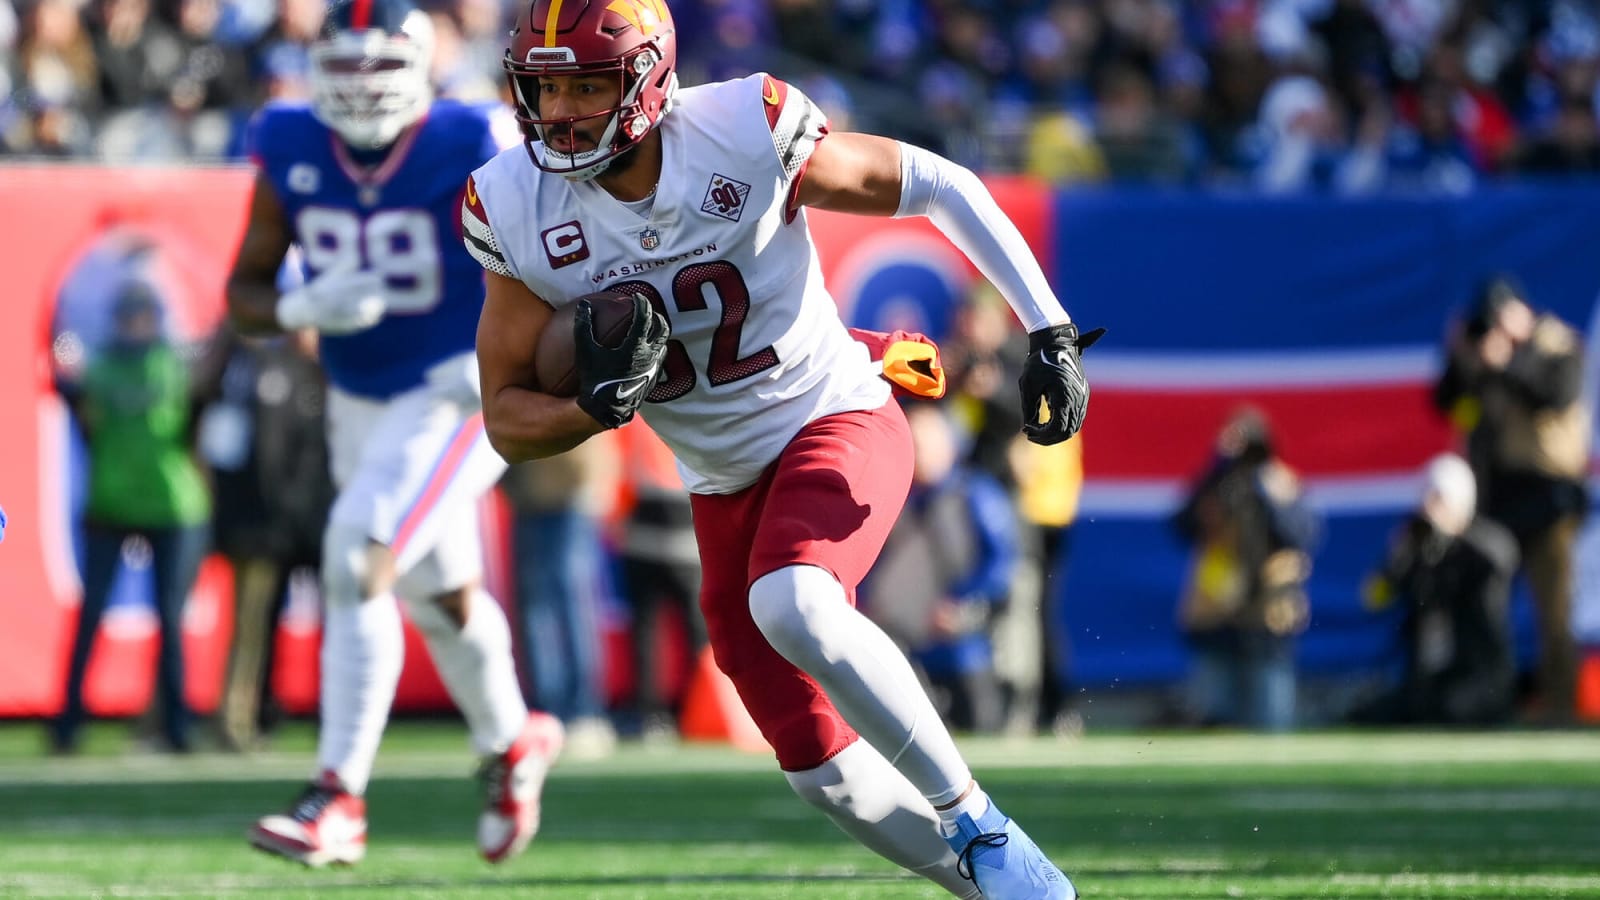 Commanders sign tight end as uncertainty remains with Logan Thomas